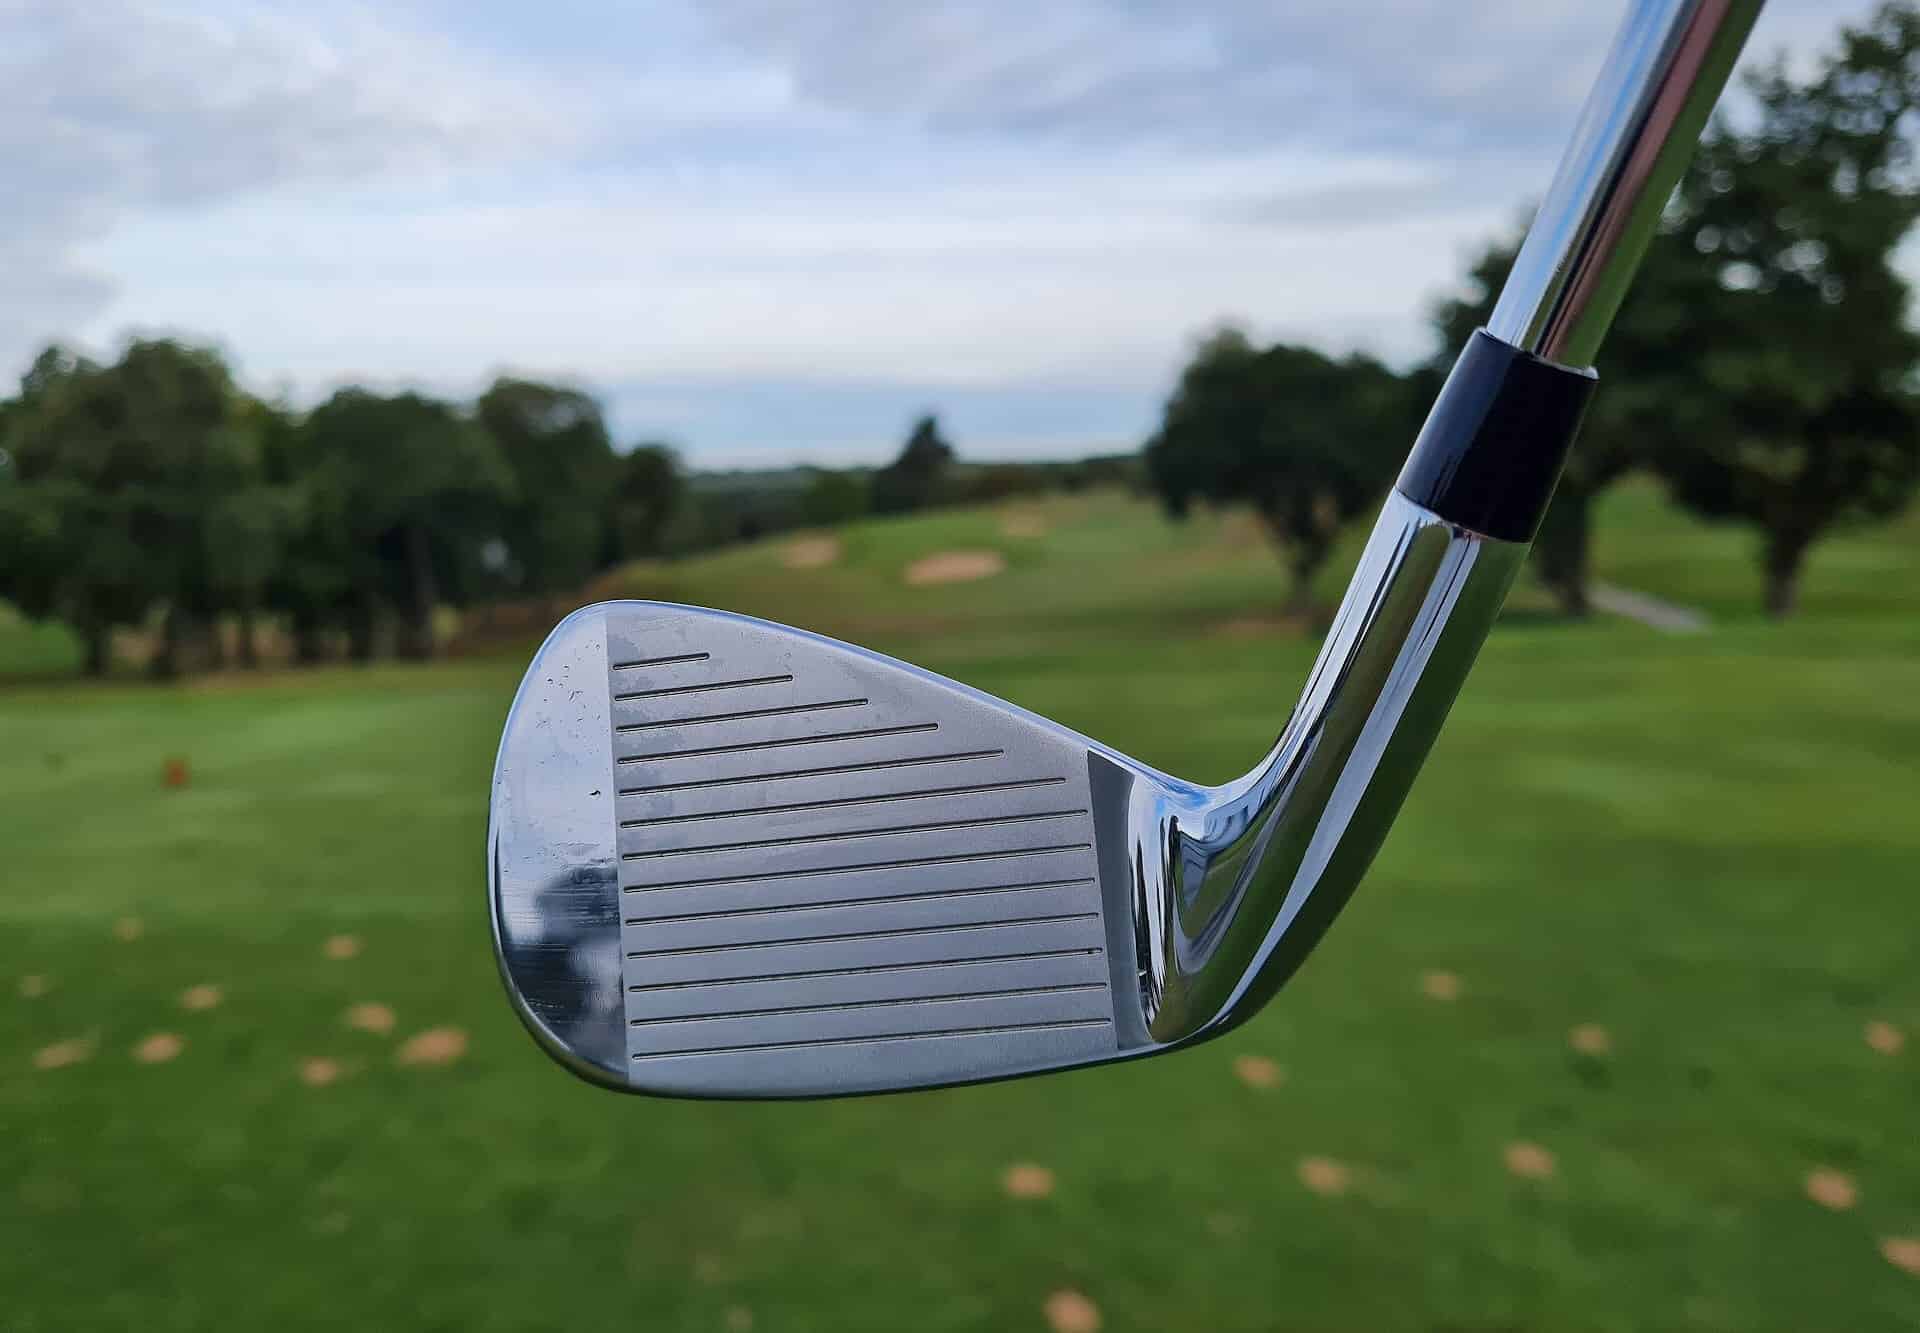 Wilson D9 Forged irons review